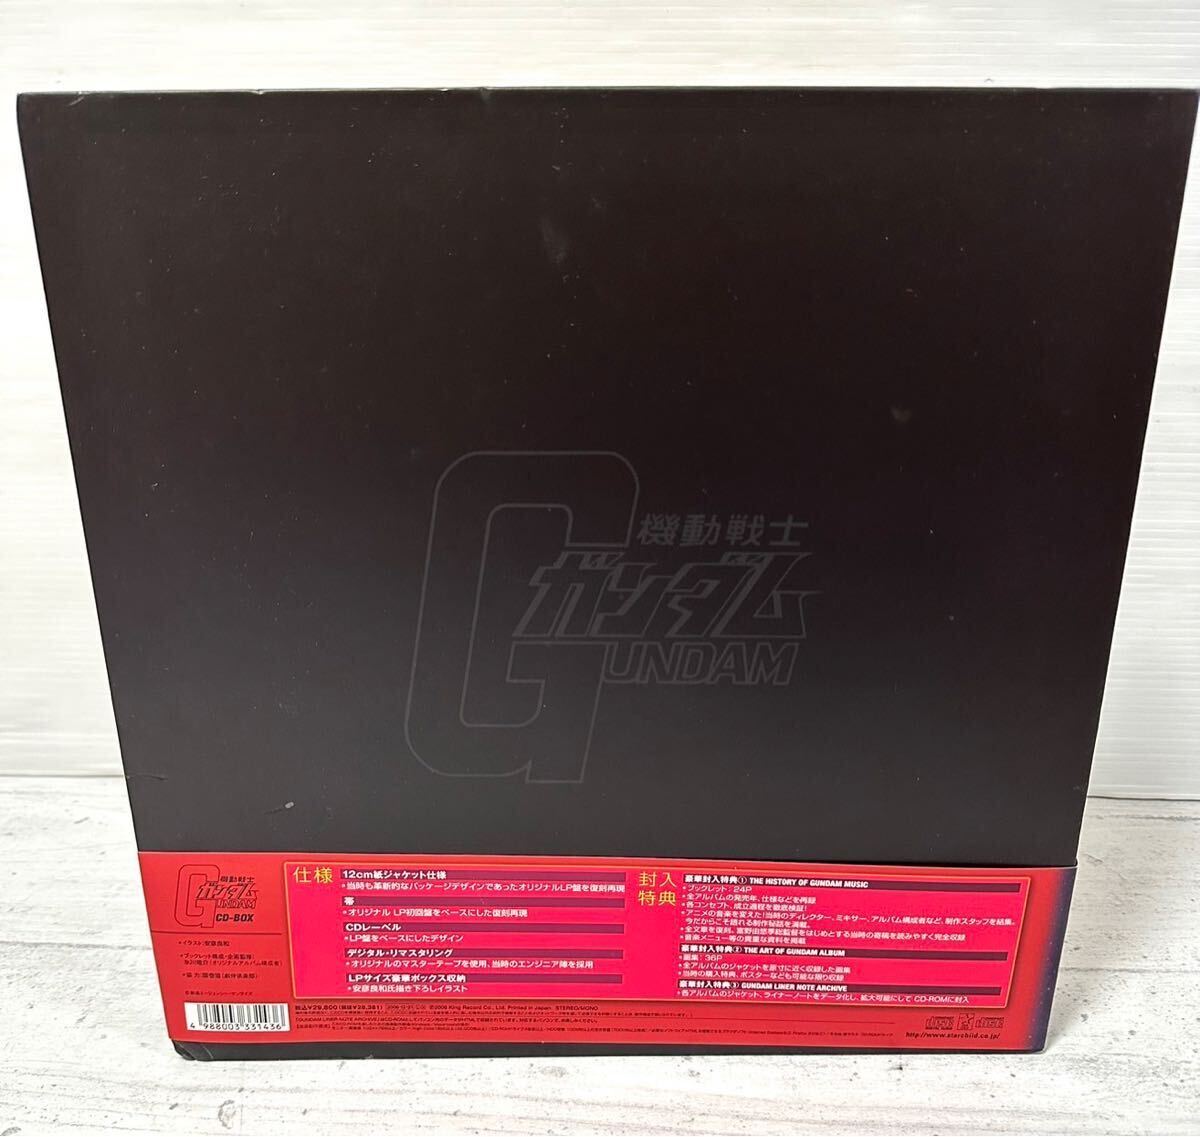 # ultra rare # Mobile Suit Gundam CD-BOX King record CD all unopened soundtrack Gundam collection ultimate time Capsule commodity 